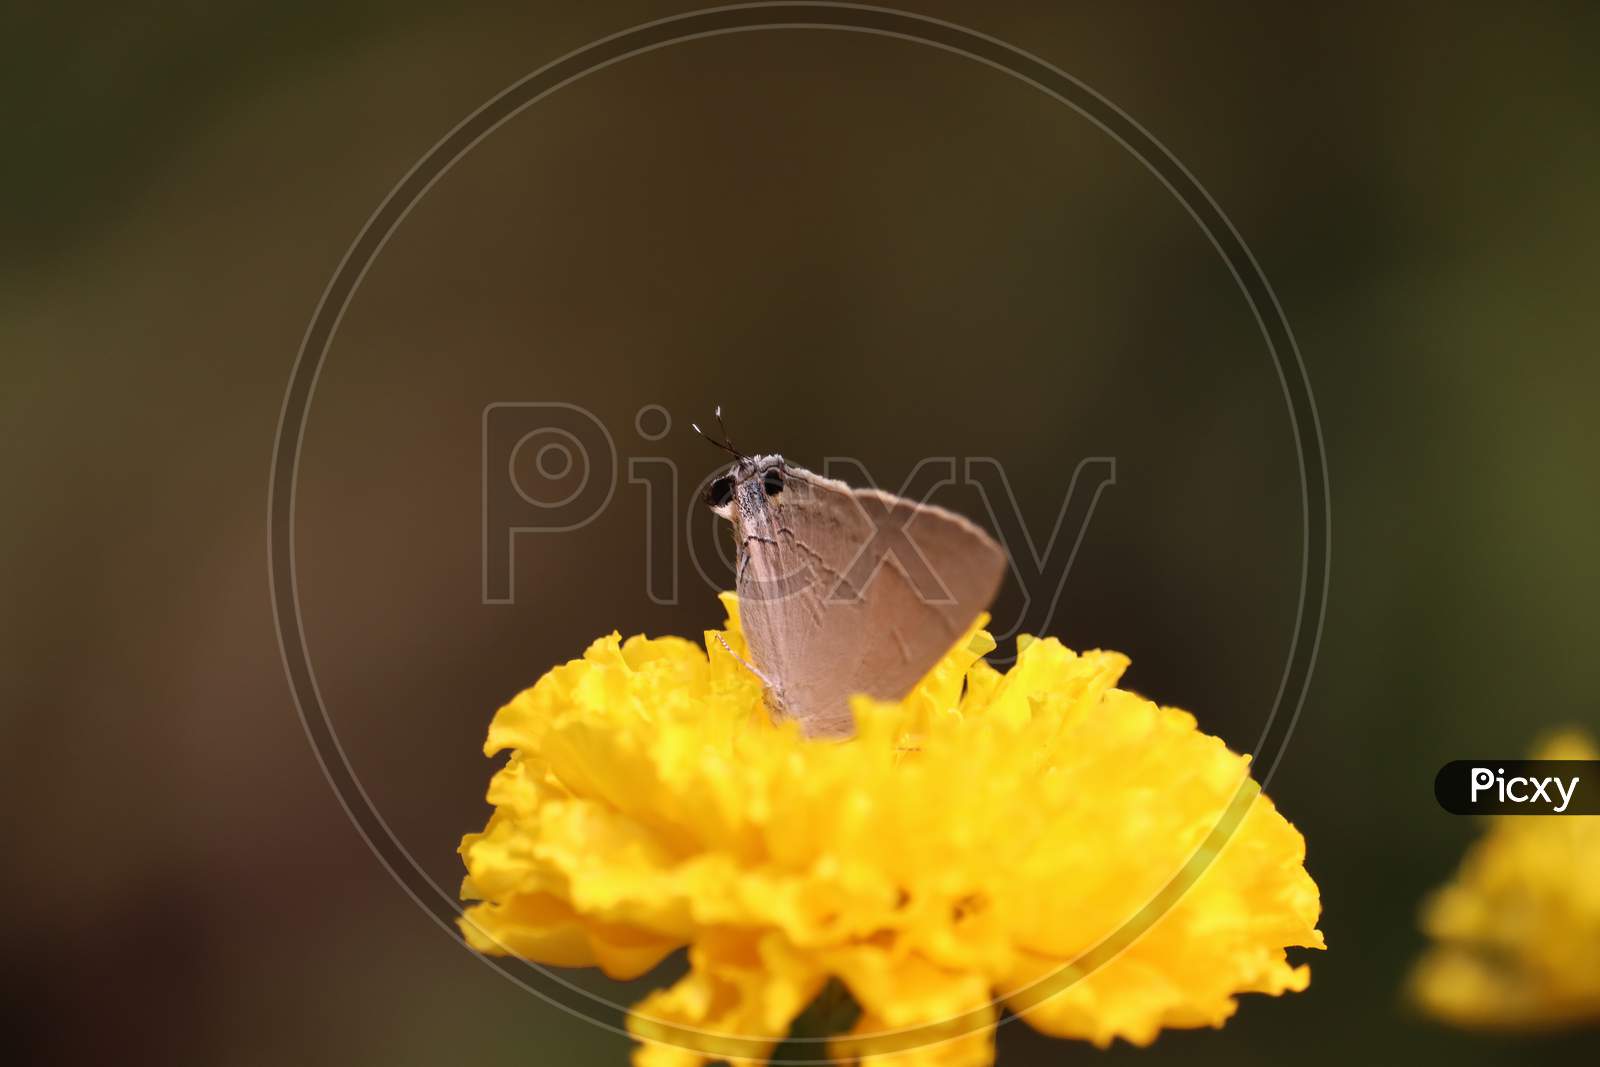 Butterfly On Marigold Flower In Jungle The Beauty Of Nature